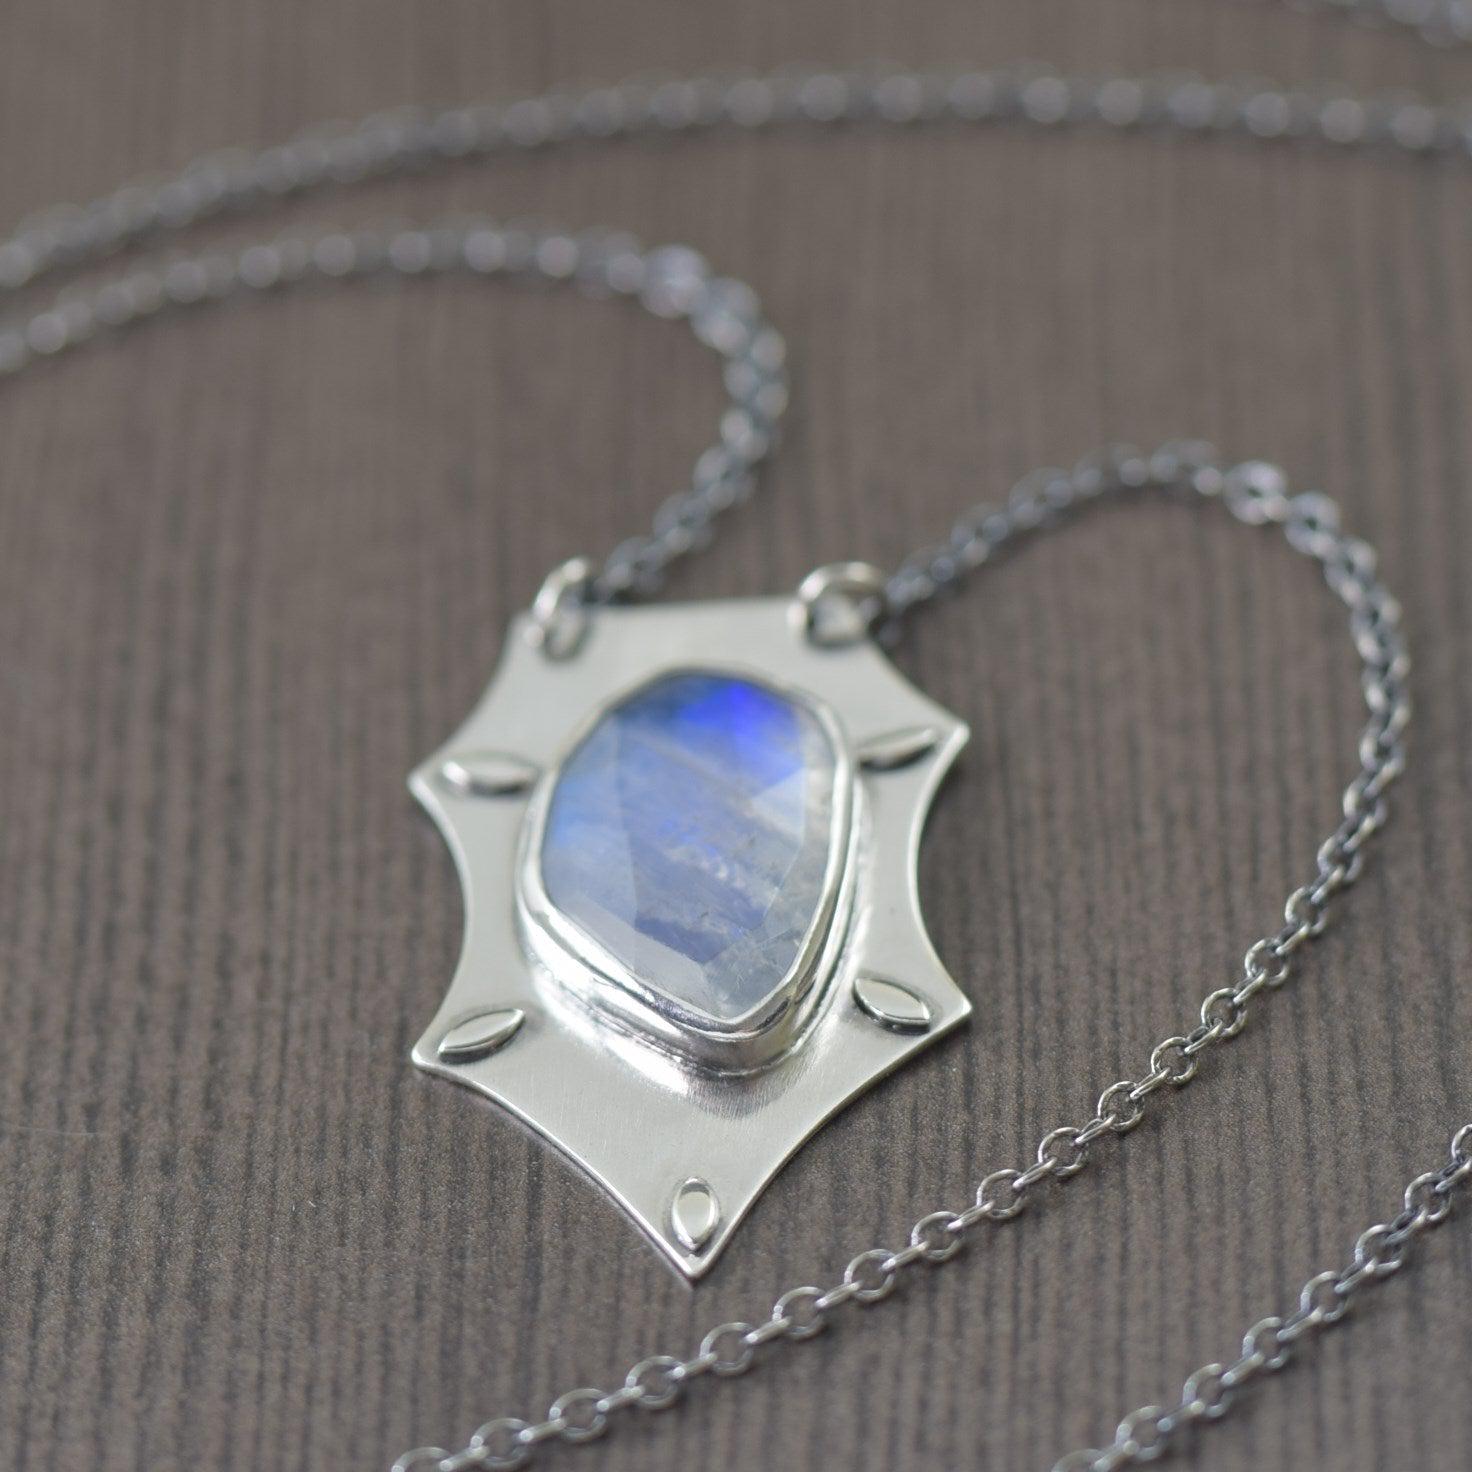 Rainbow Moonstone sterling silver hand fabricated pendant necklace